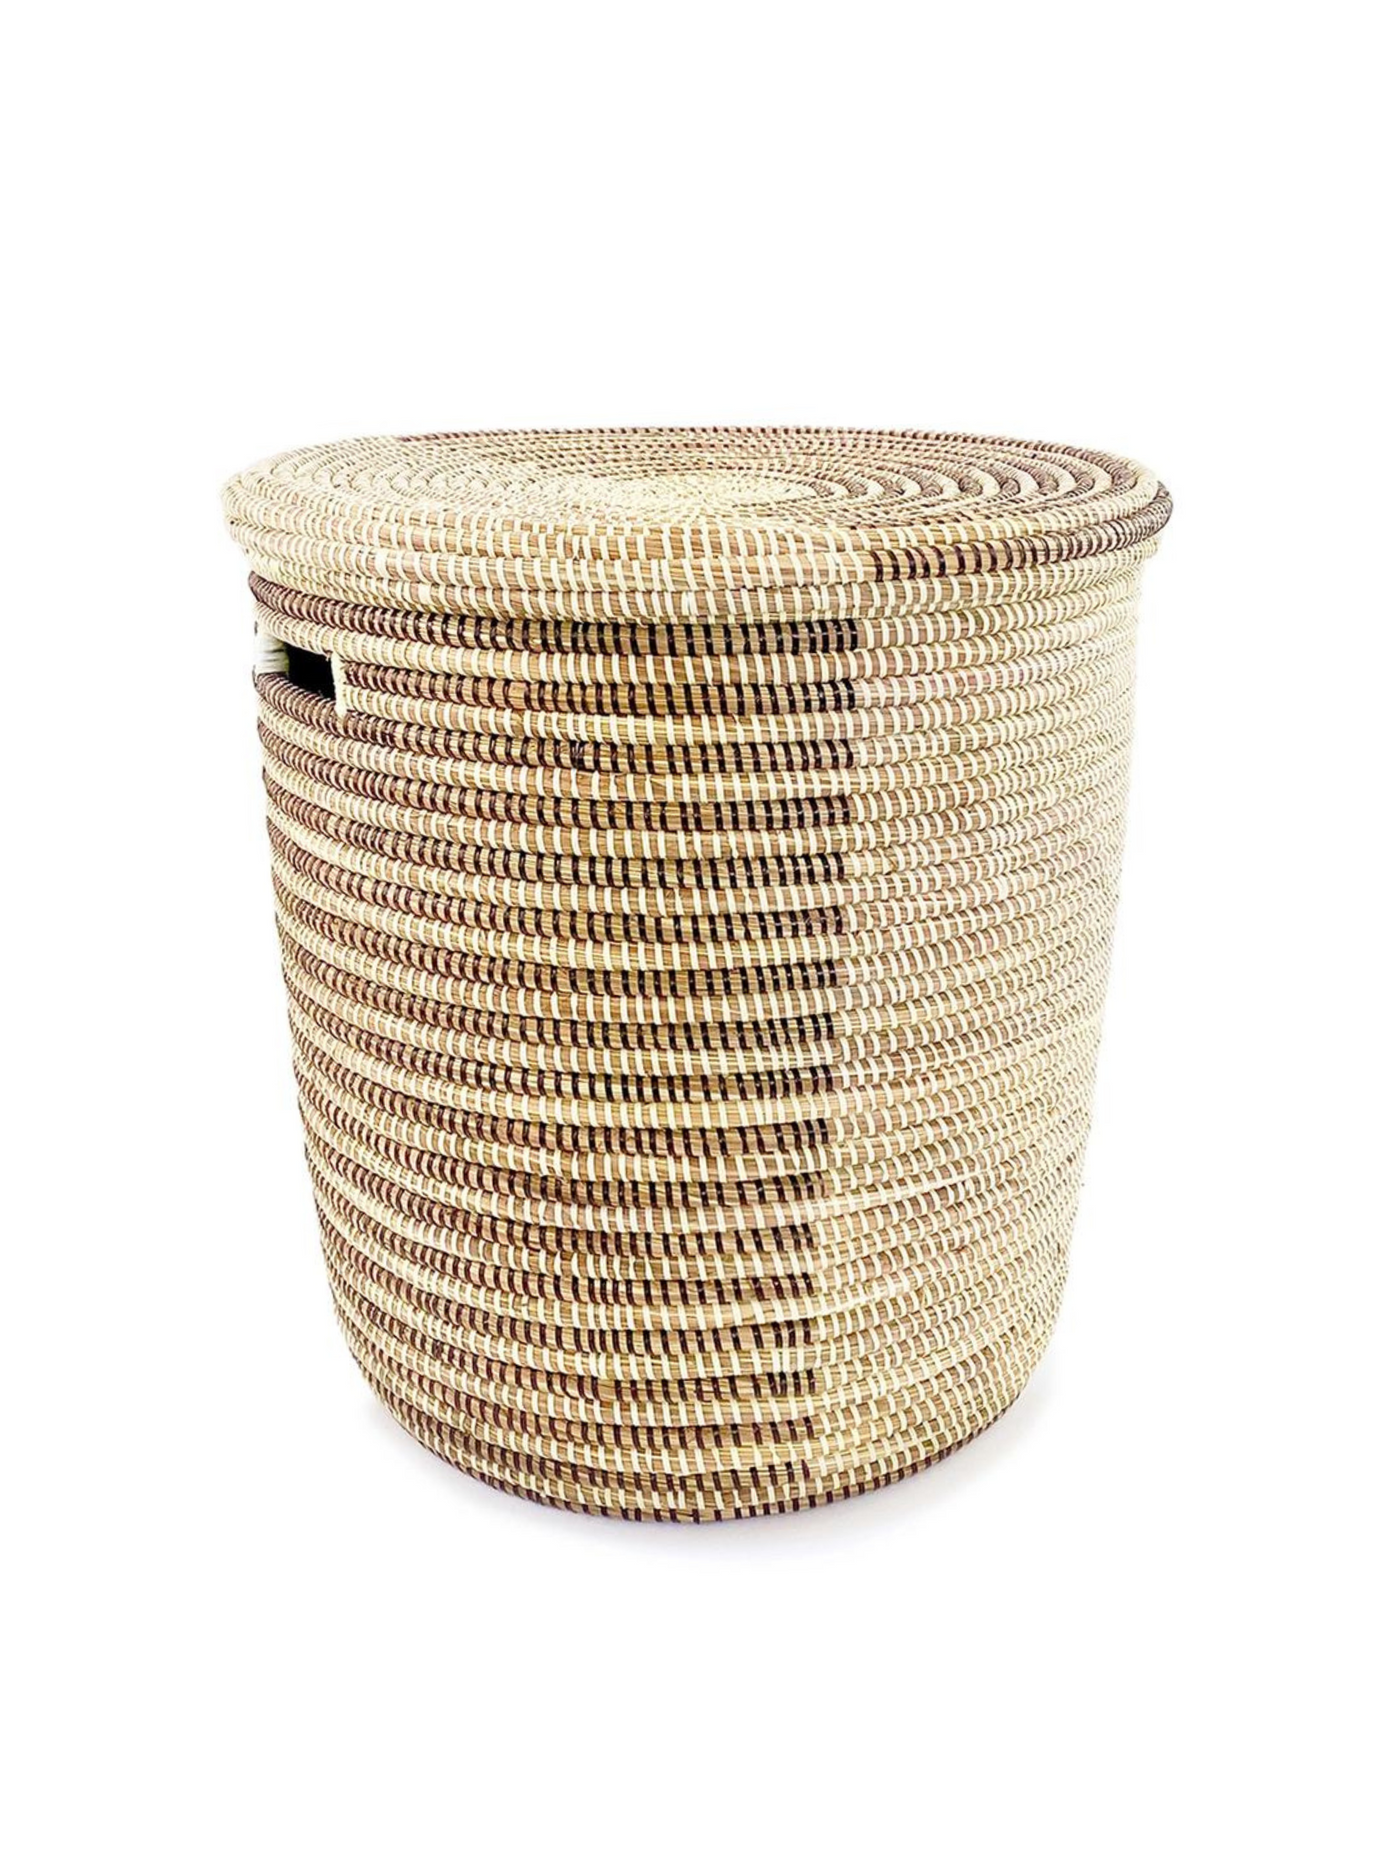 Laundry Basket - Espresso and Cream (Pick up or local delivery only)